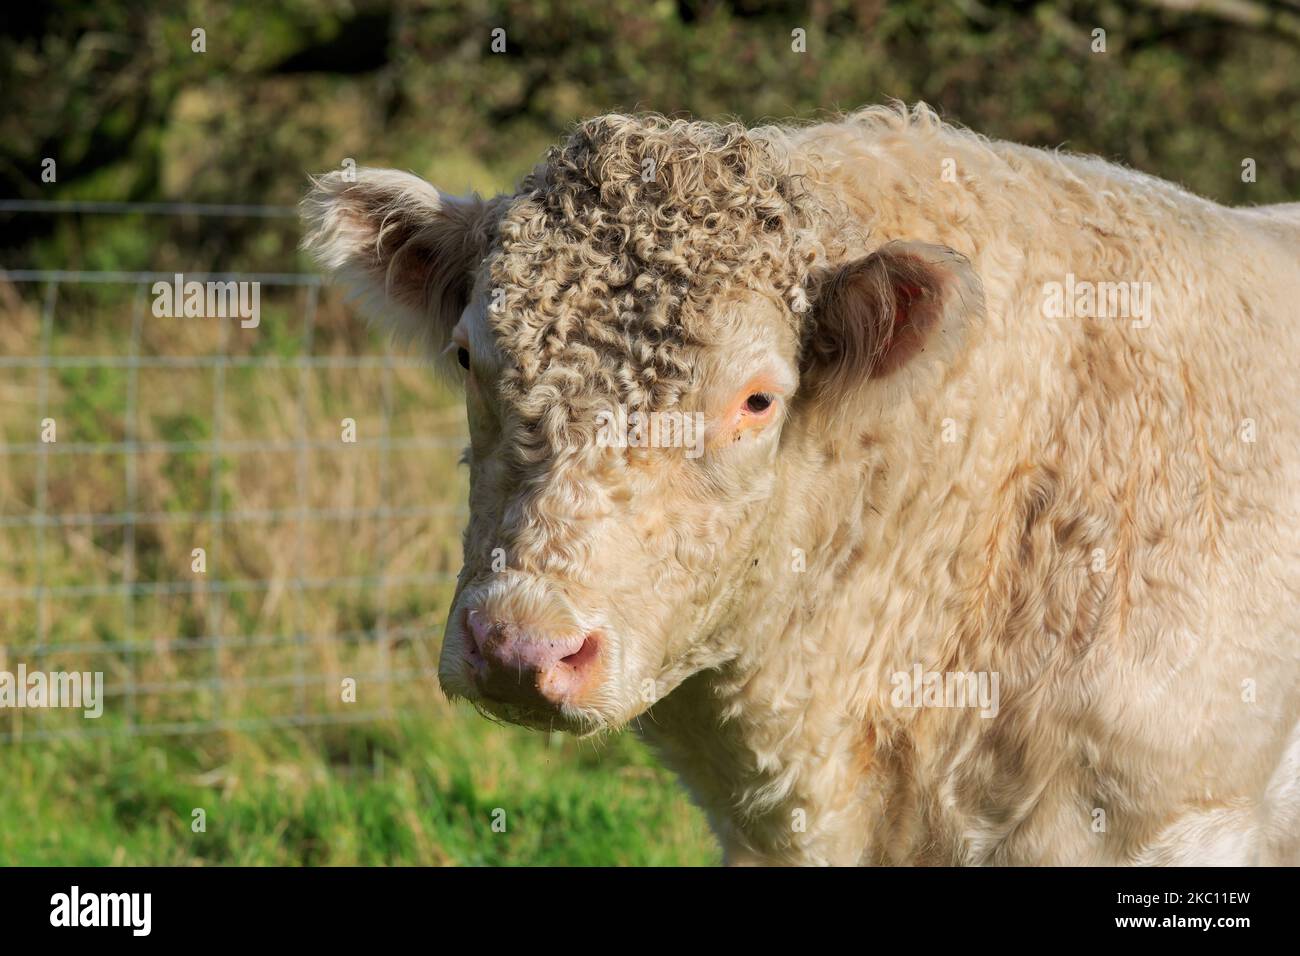 Close up on the head of a young Whitebred Shorthorn bull lit by evening sun Stock Photo